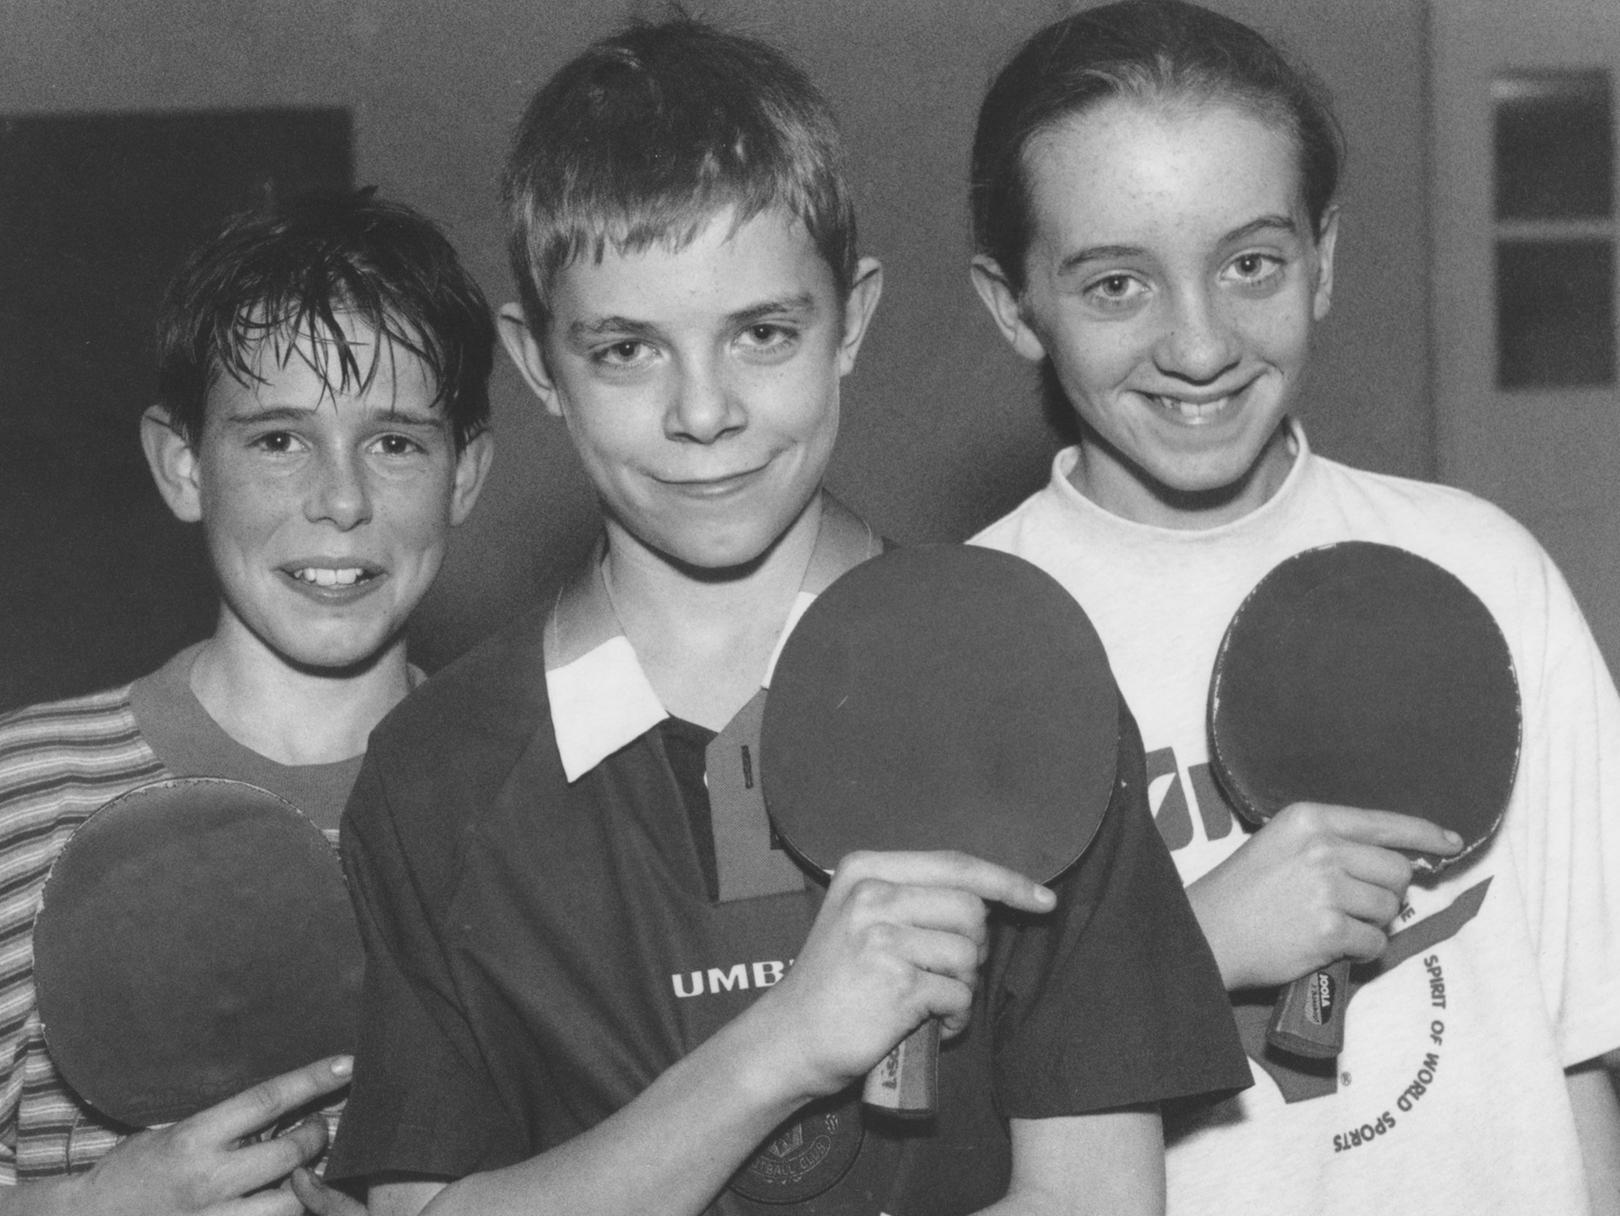 One of the table tennis teams pictured at St Saviour's Church in January 1997. Ravens, from left, Neil Raine, Michael Pearson and Sophie Clayton.